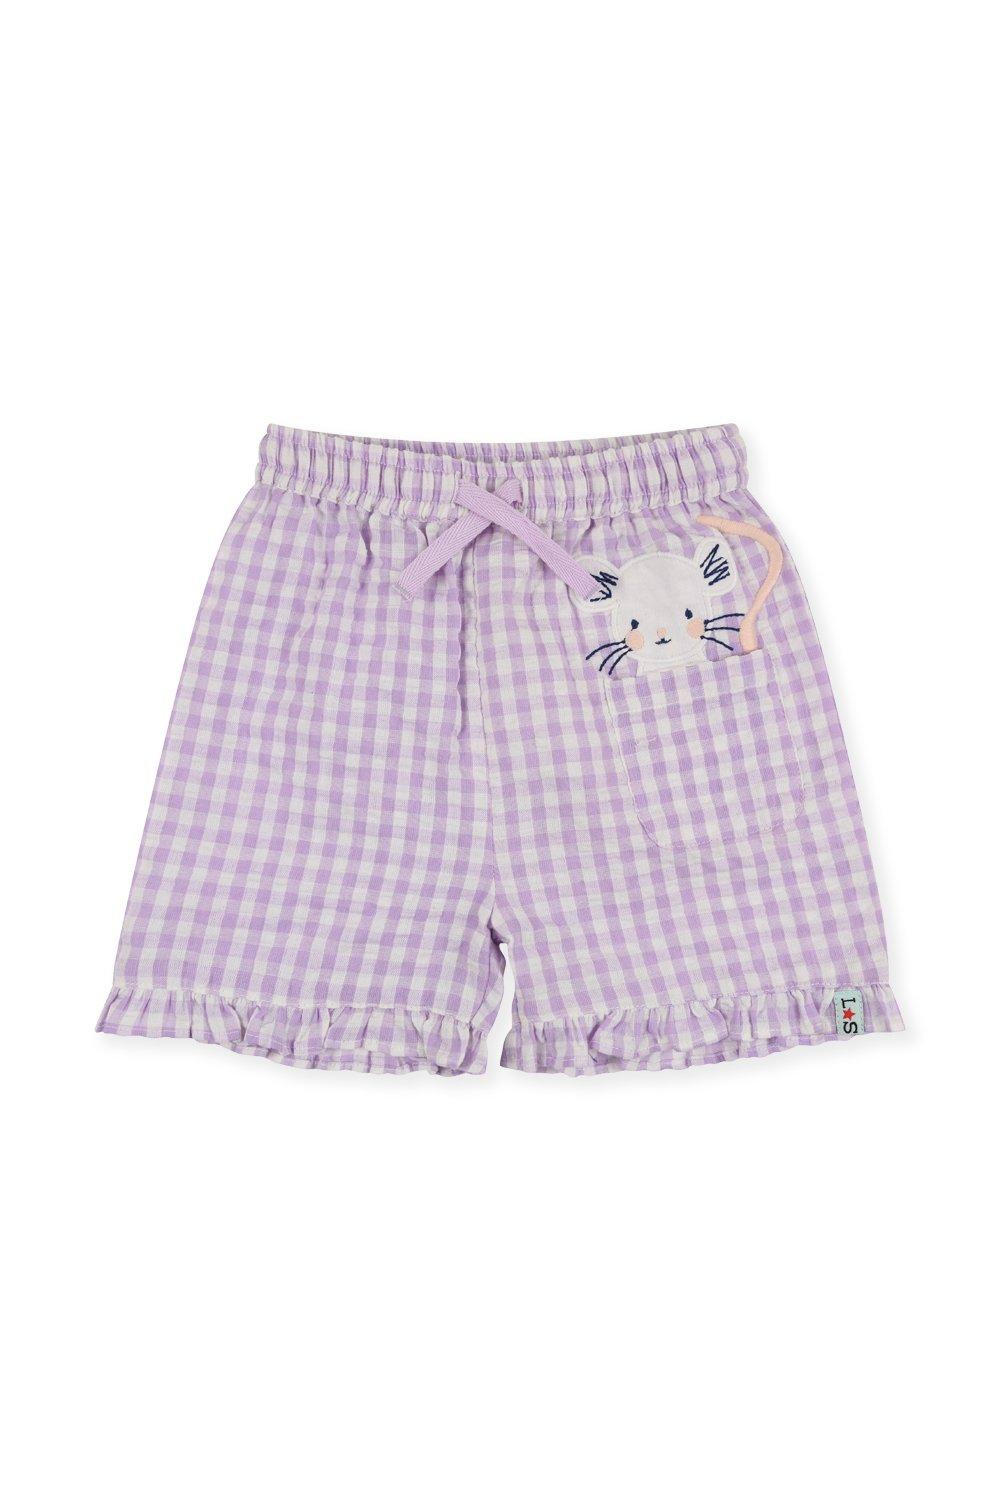 Gingham Mouse Shorts